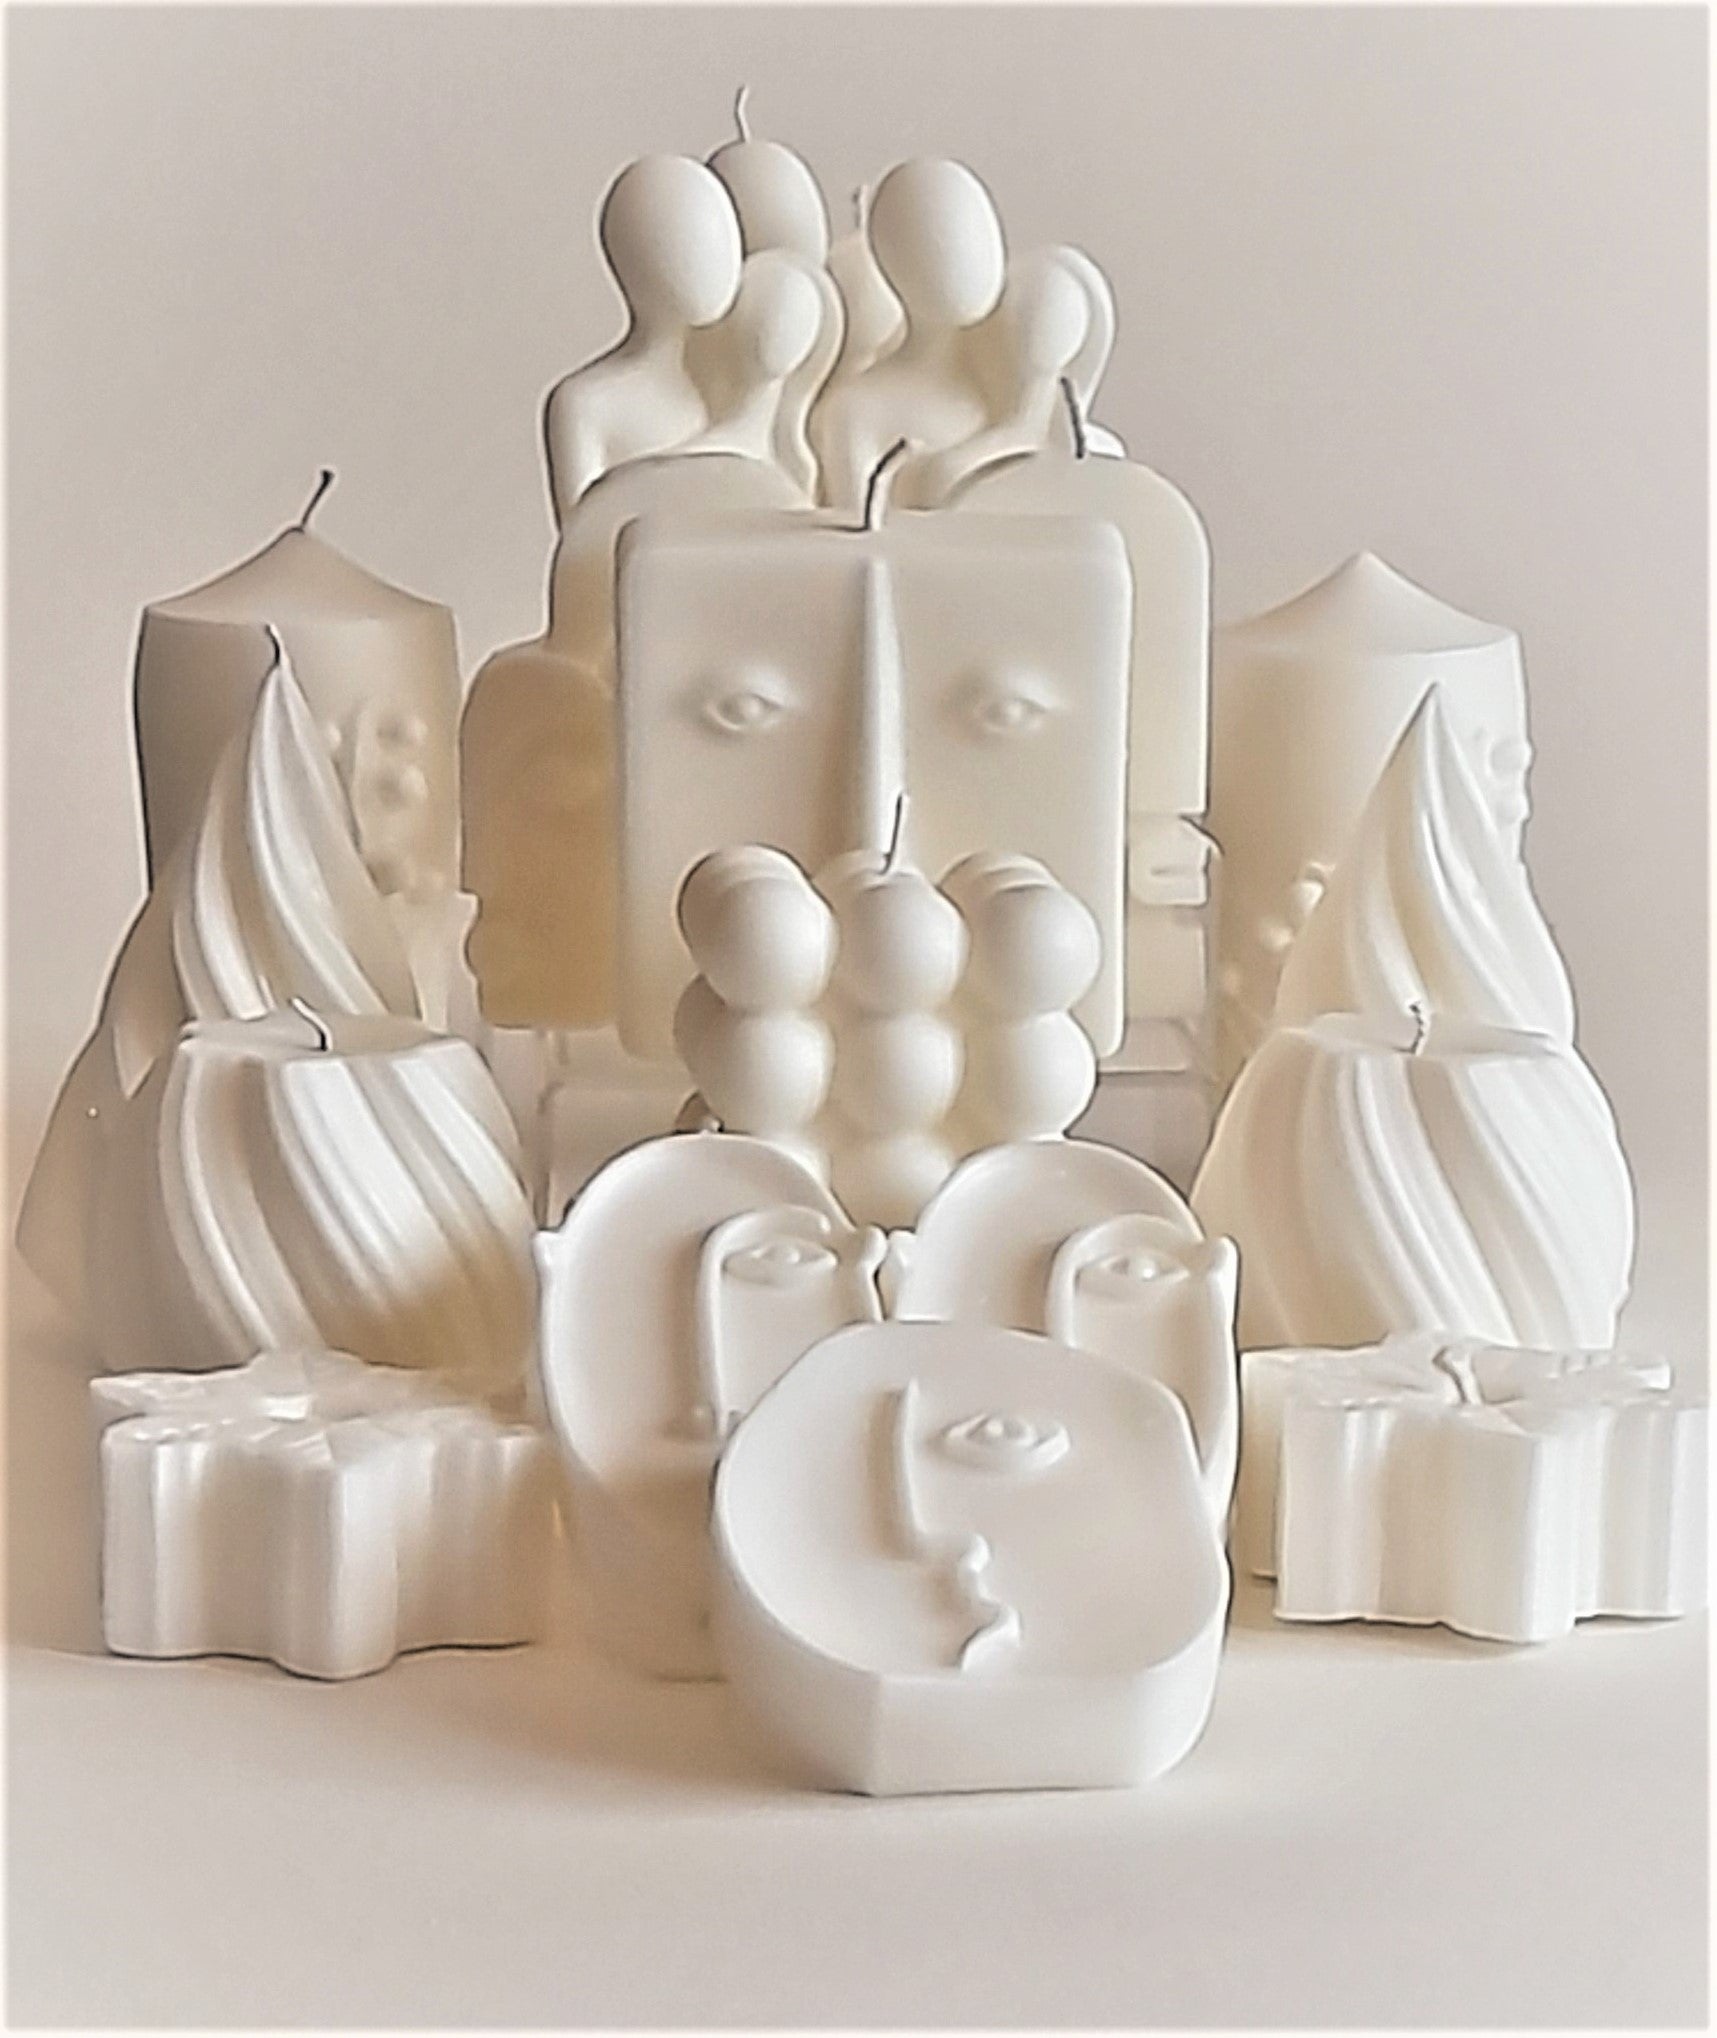 sculptural And Decorative Candles